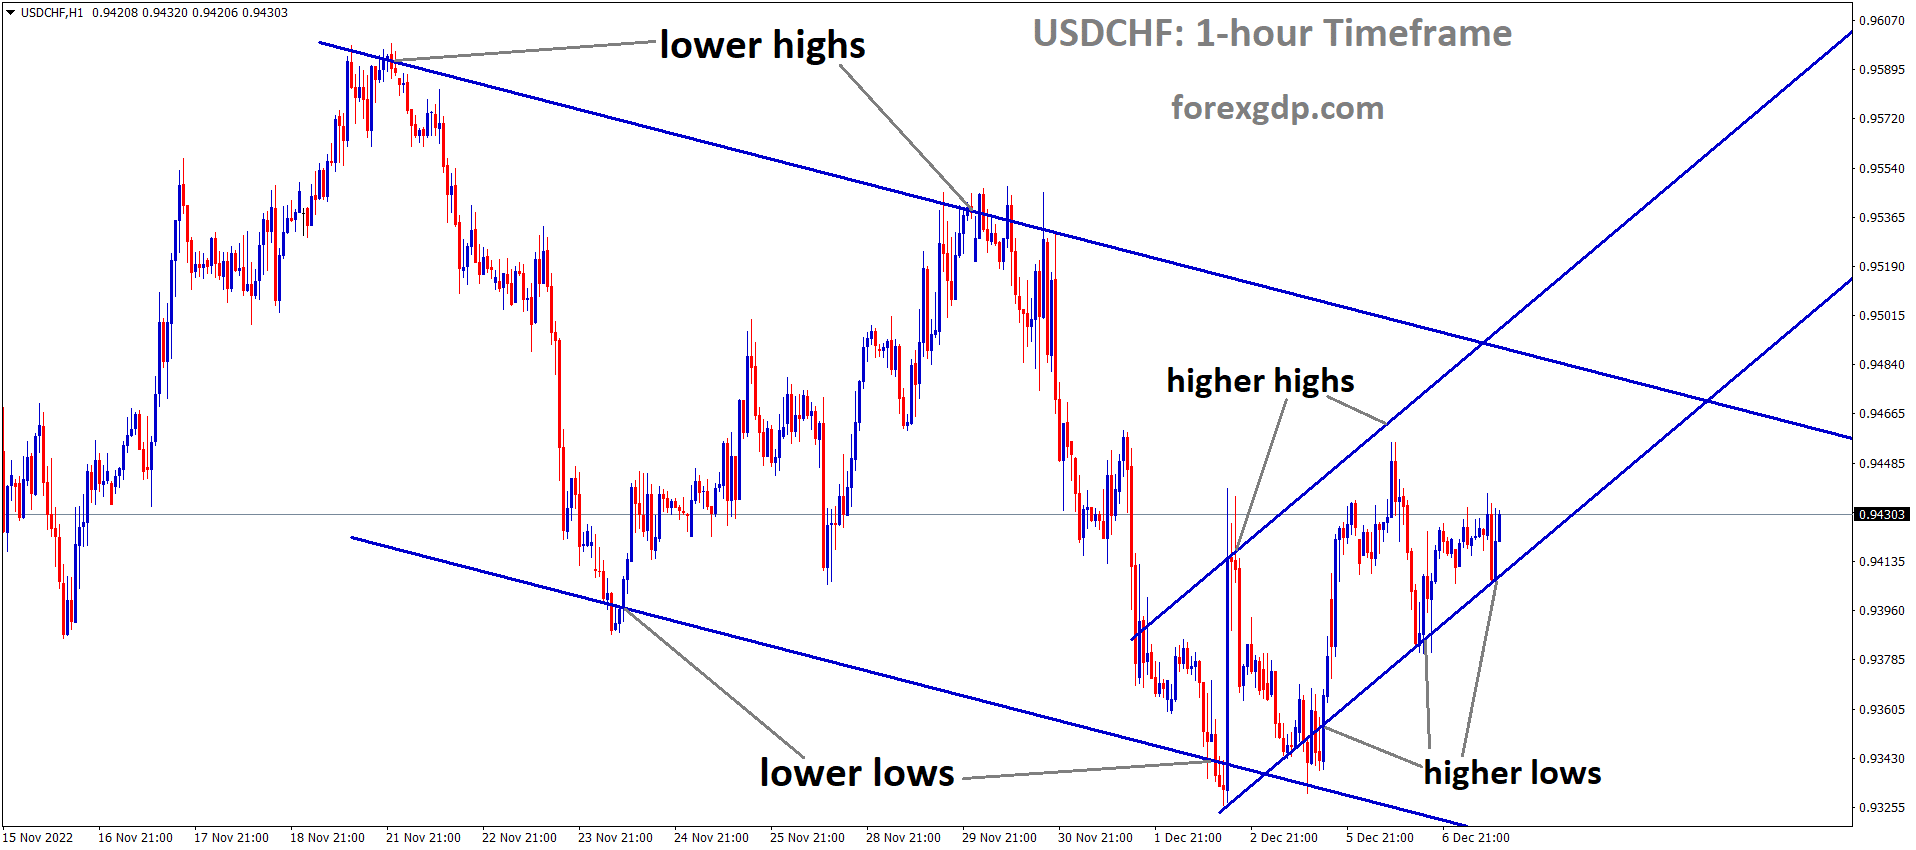 USDCHF is moving in the major Descending channel and the market has rebounded from the higher low area of the minor Ascending channel.